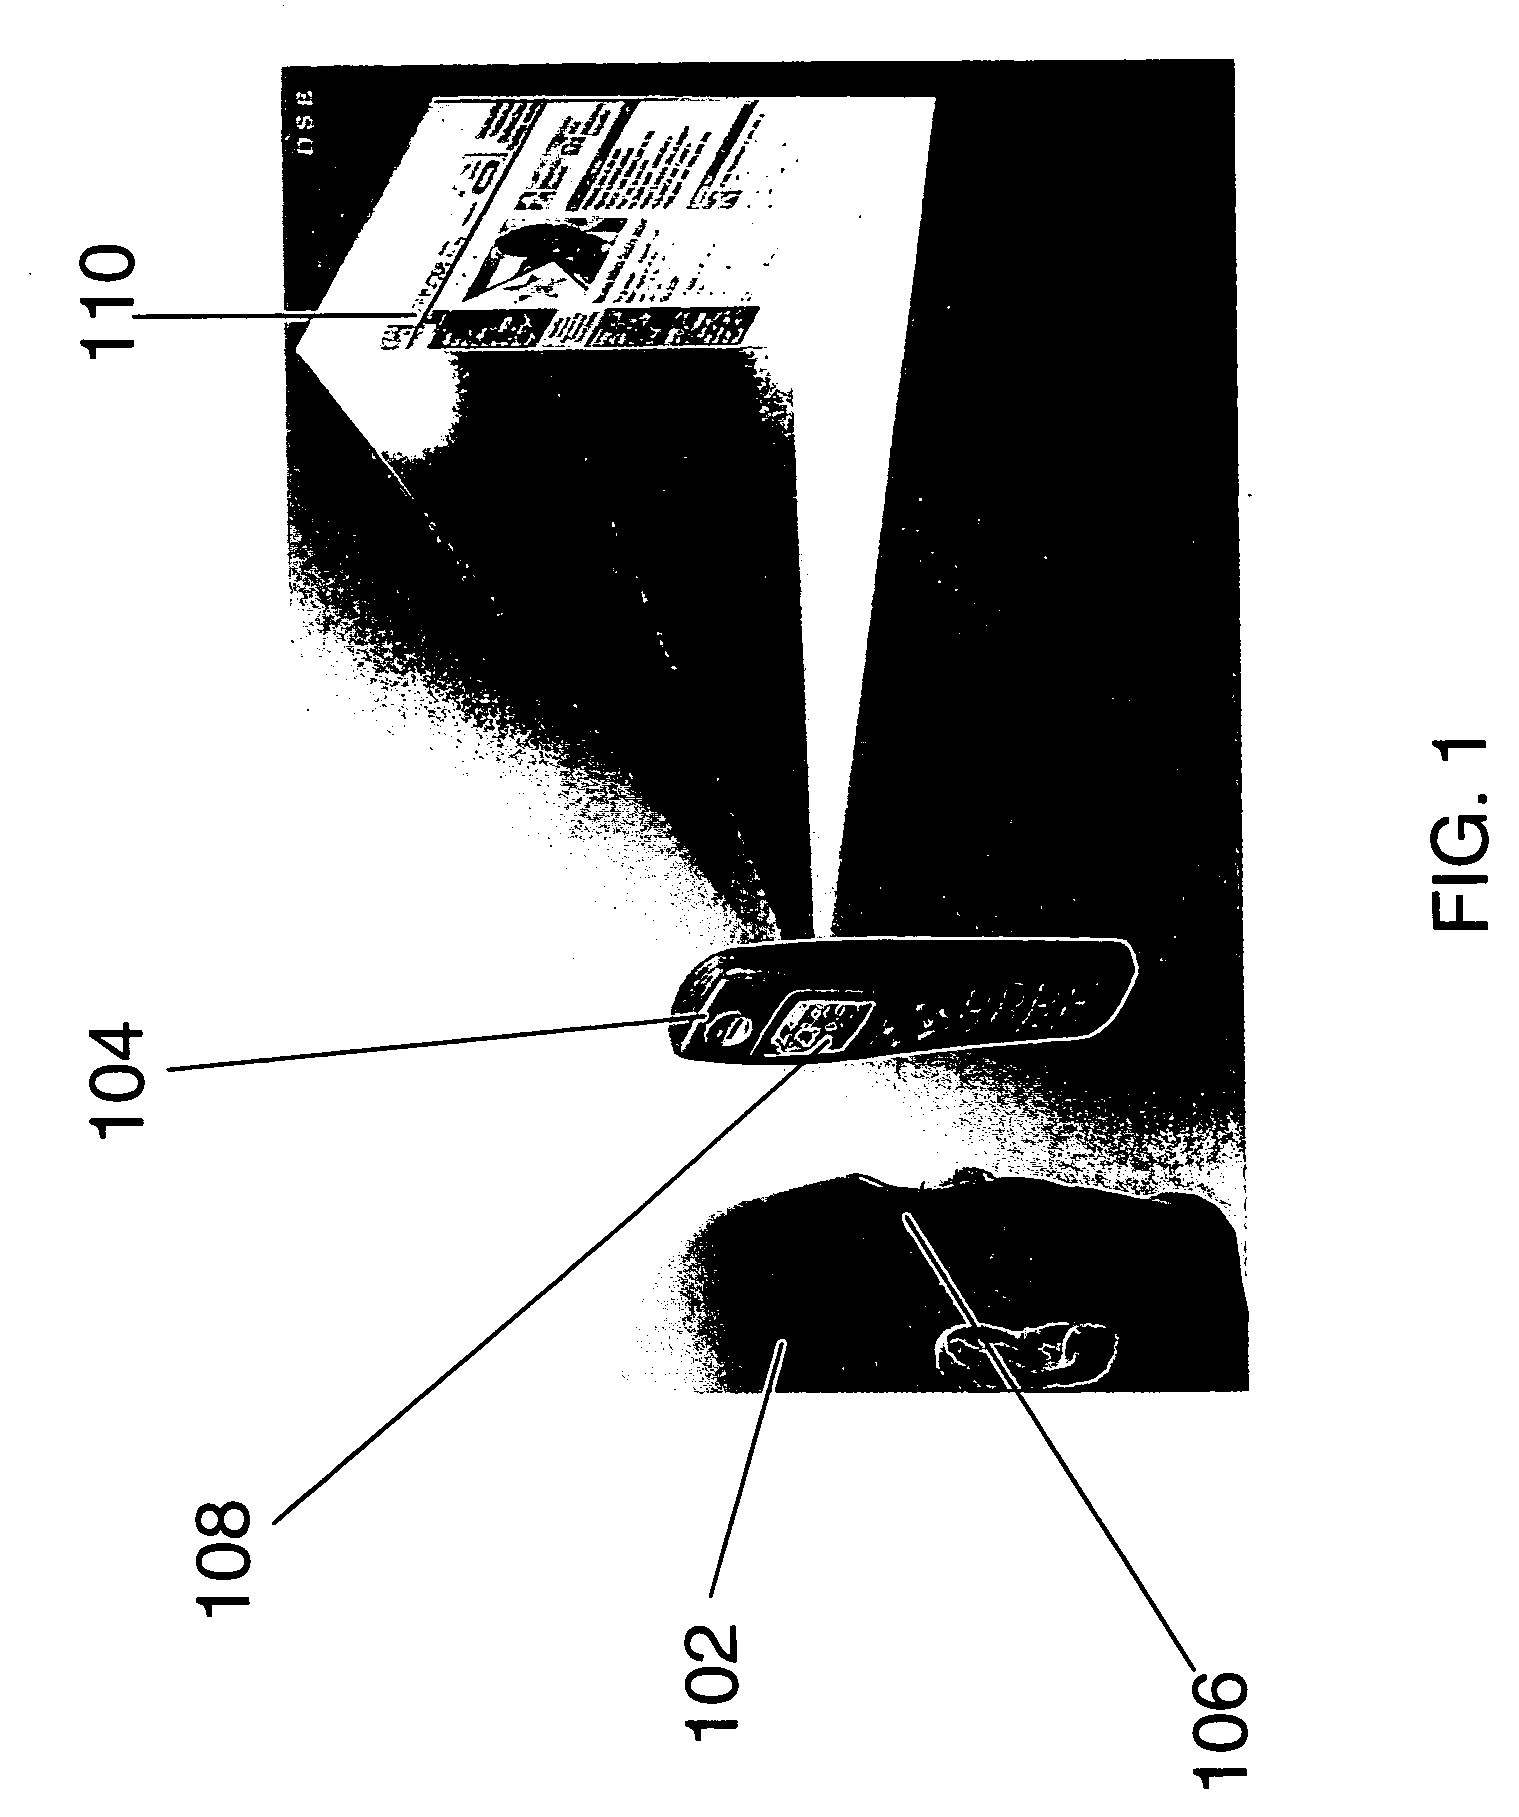 System and method for automatic display switching